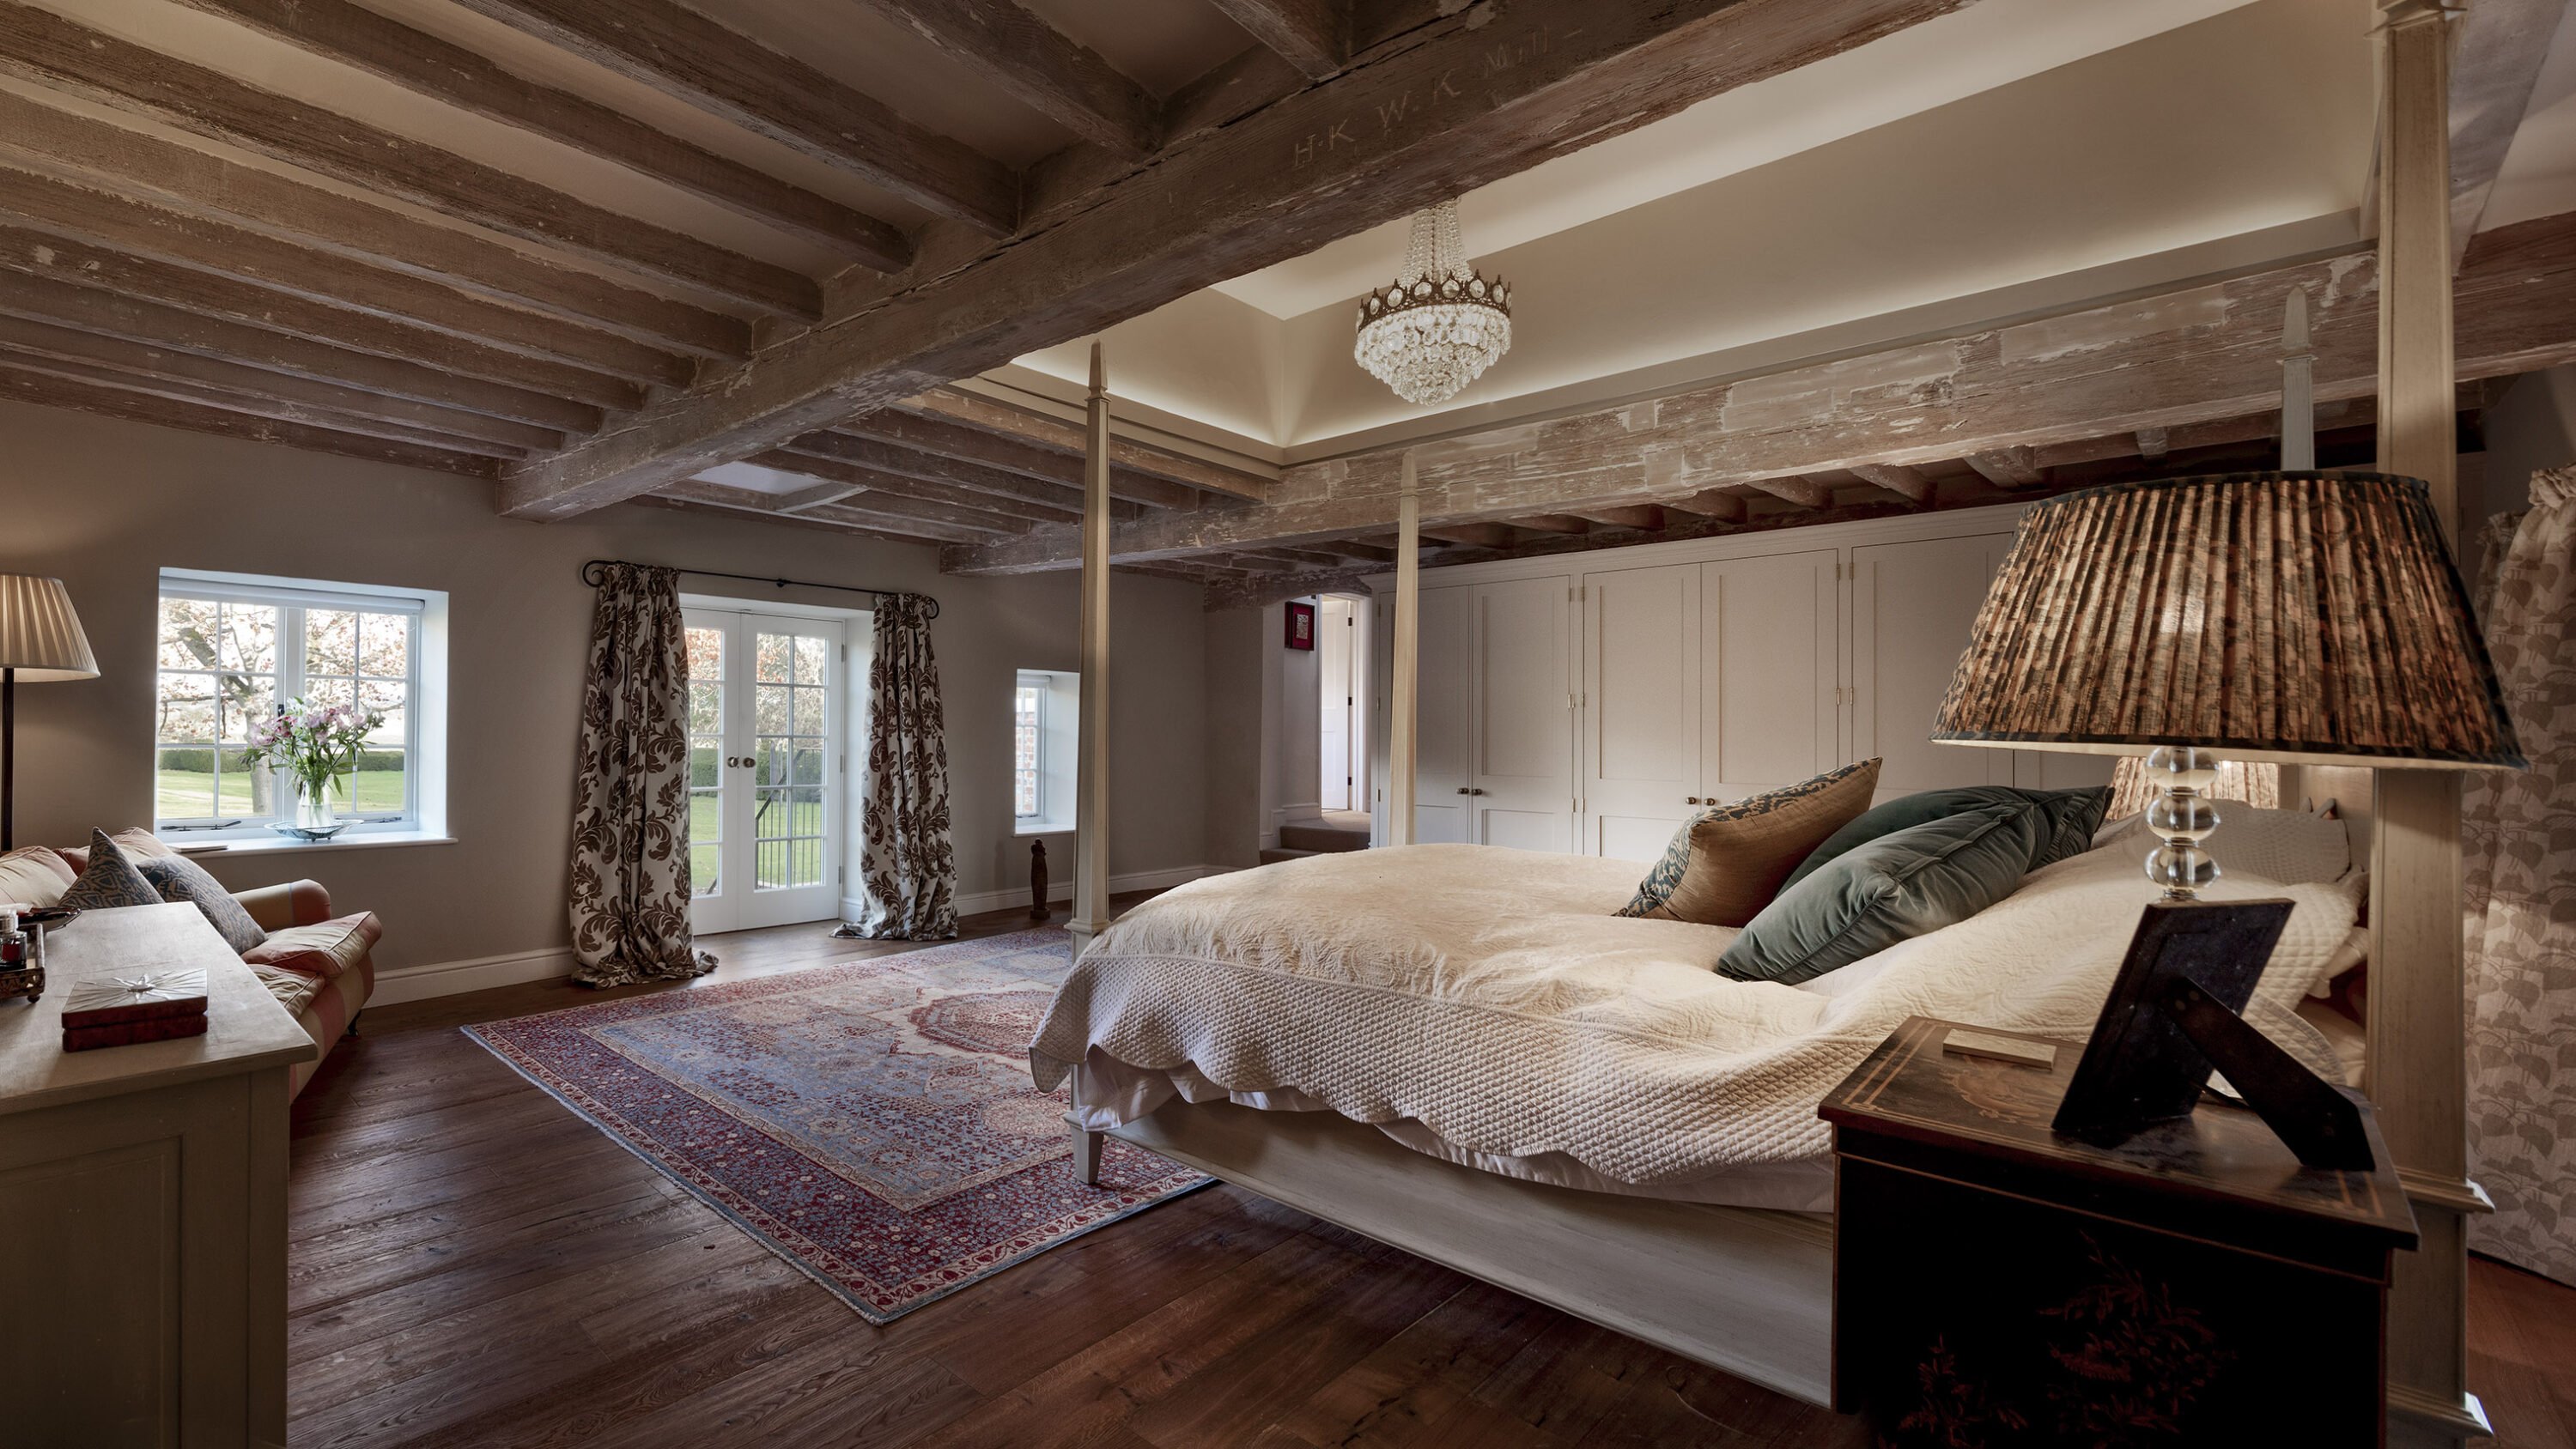 Beautiful Country home master bedroom design